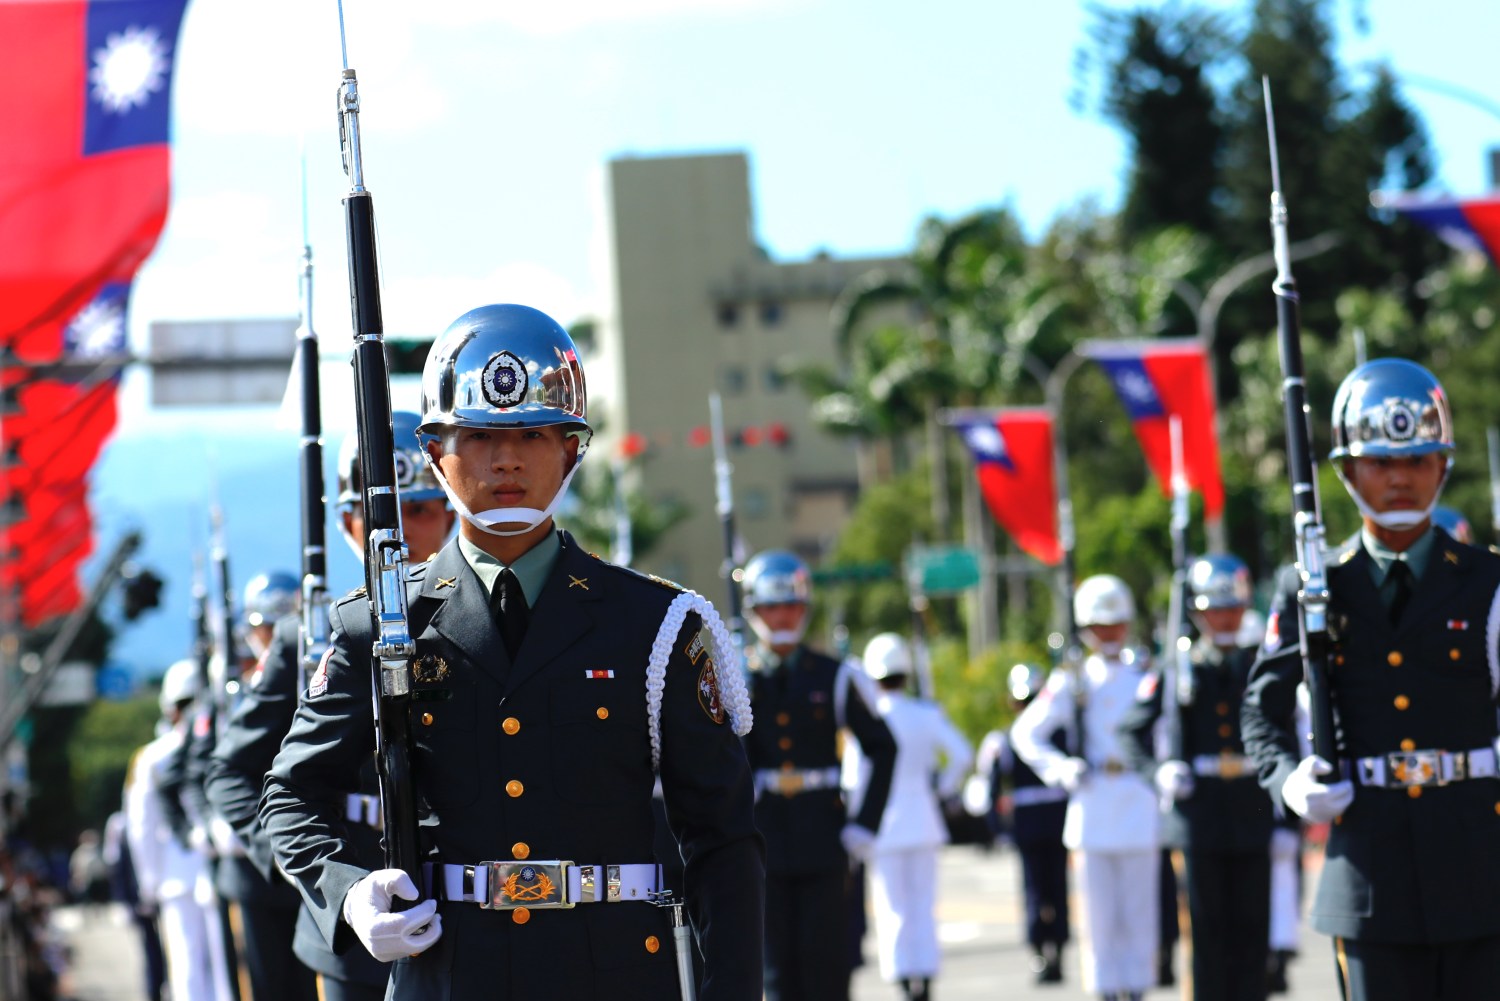 Soldiers take part in a parade during the National Day Celebration, following Chinese President Xi Jinpings vow to unify Taiwan by peaceful means, in Taipei, Taiwan, 10 October 2021. The self ruled island has been facing intensifying military threats from China including record number of fighter jets cruising around Taiwan, whilst building better relations with the US, Australia, Japan and European countries including Lithuania, Poland and the Czech Republic.  (Photo by Ceng Shou Yi/NurPhoto)NO USE FRANCE